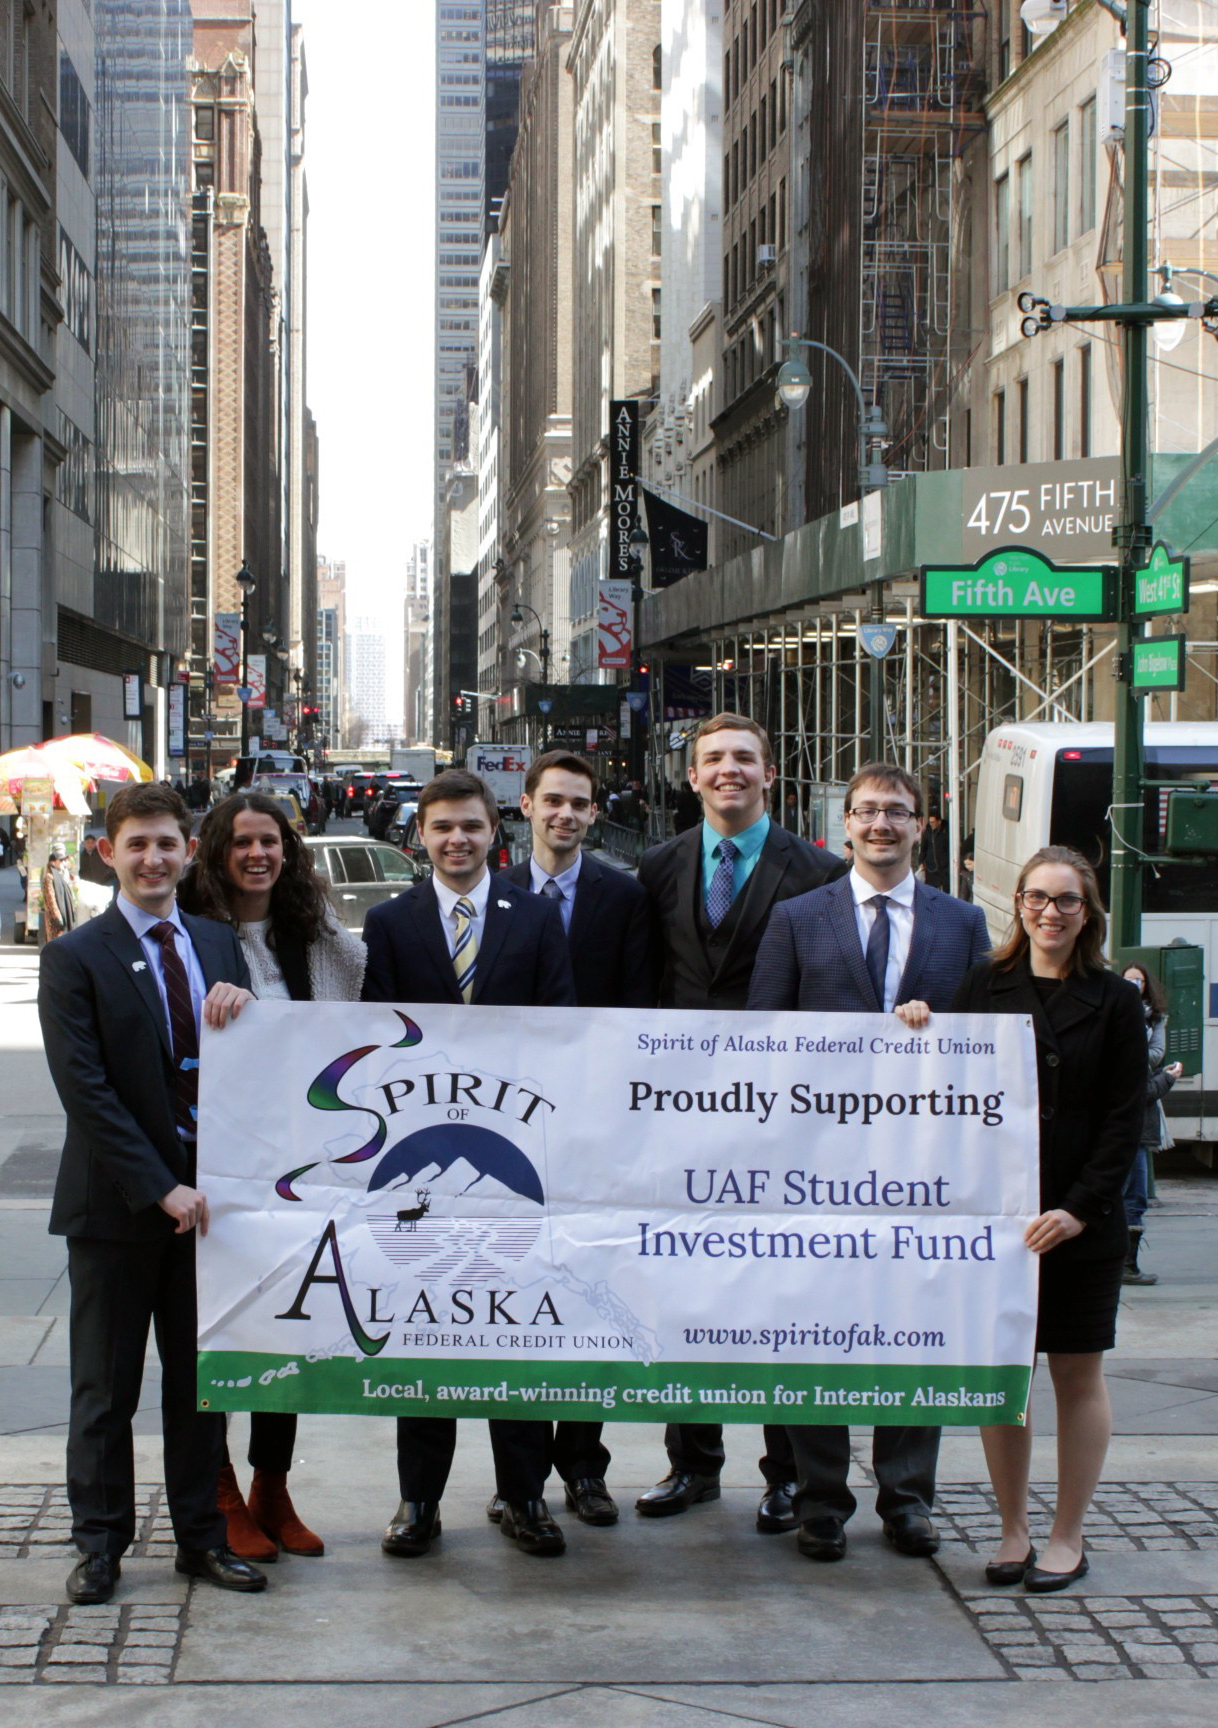 SIF Students (L to R) on 5th Avenue in NYC: Lutfi Lena, Anni Uhl, Peter Freymueller, Jeremy Weaver, Ben Carstens, JP Landry, and Celie Hull